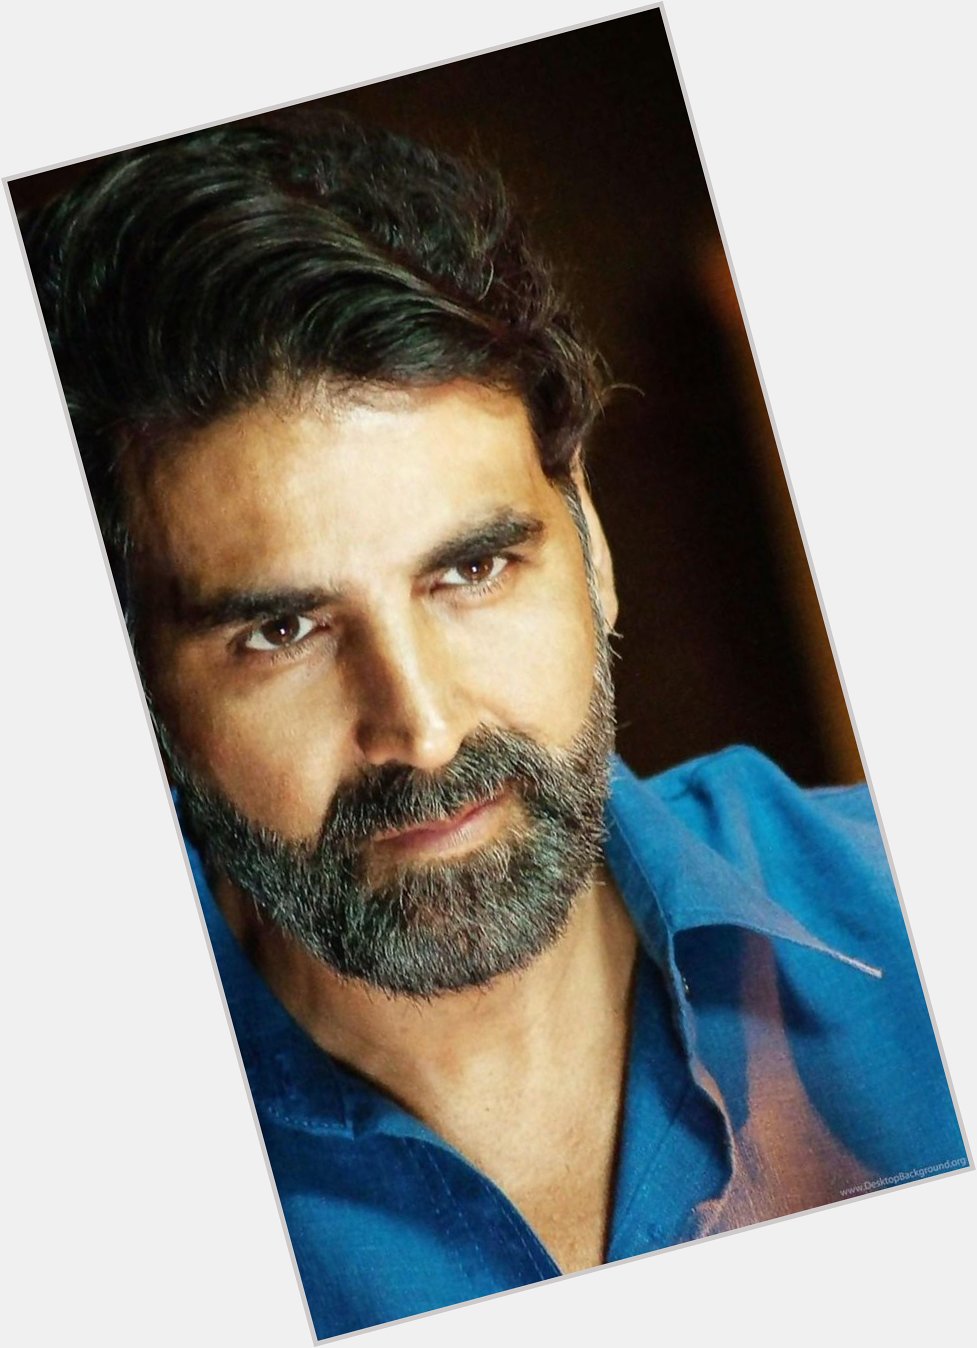 Happy birthday Akshay Kumar sir  have a super year. Stay blessed and happy. 